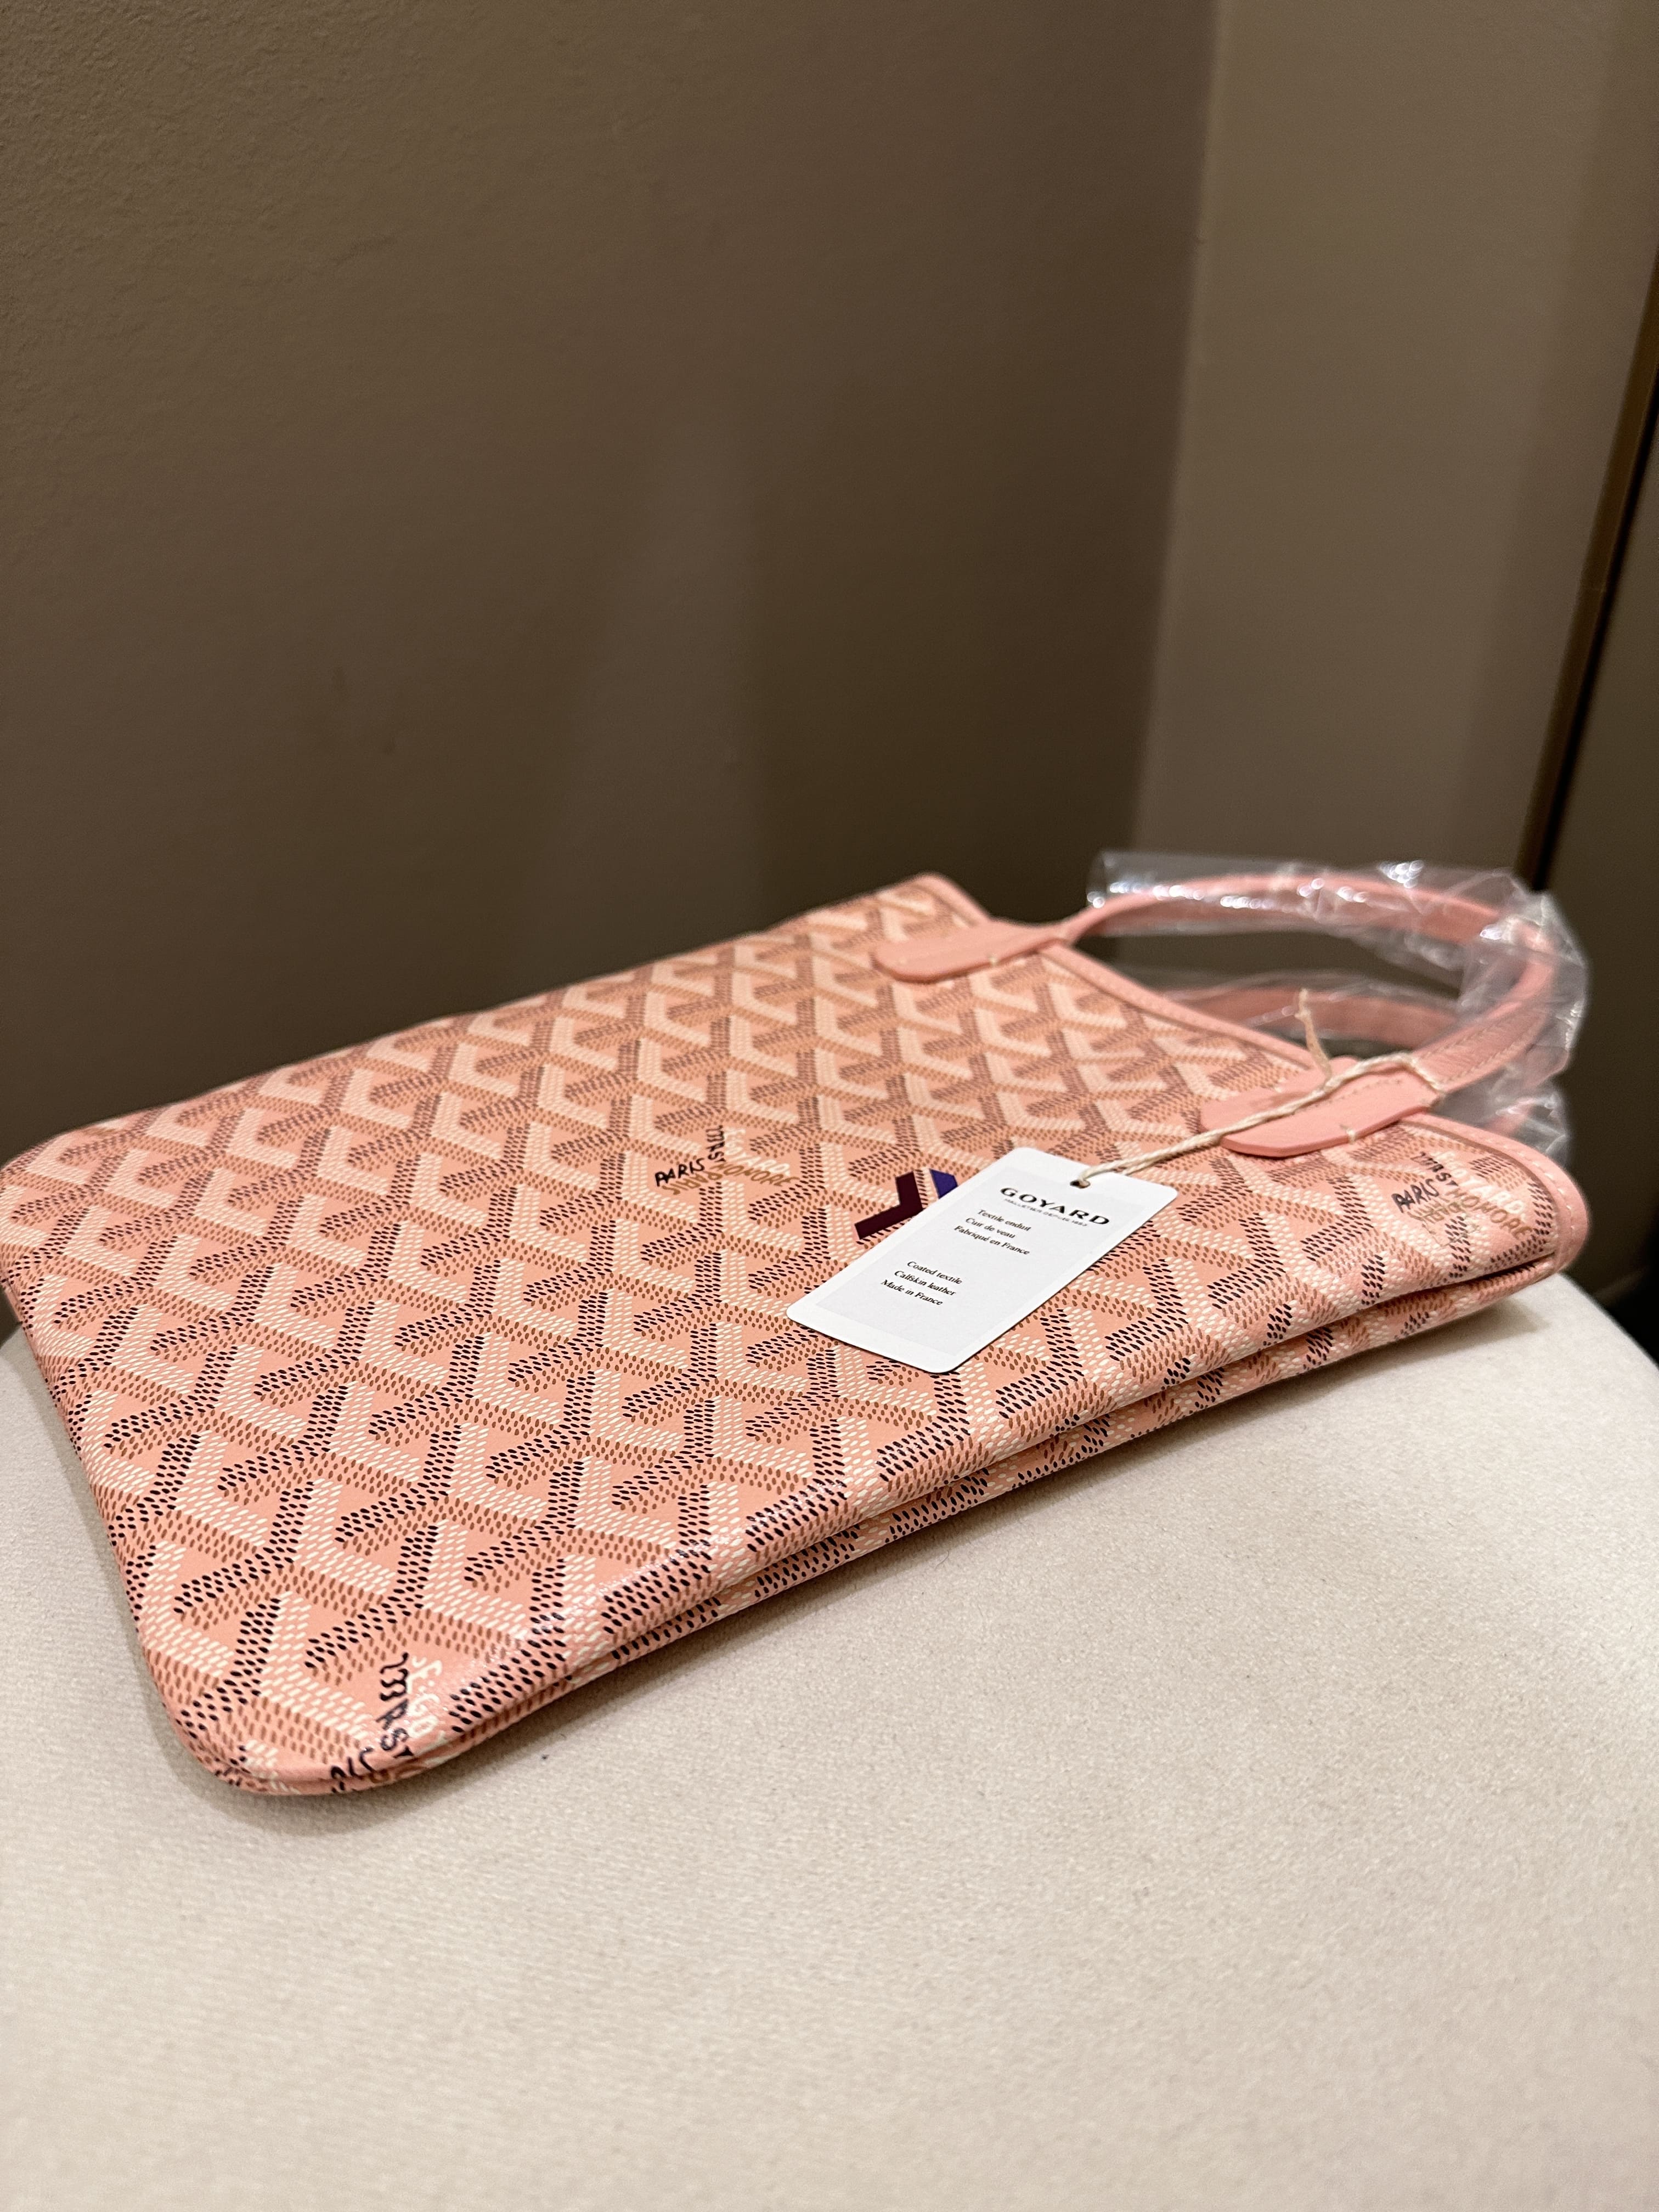 Goyard Limited Edition Poitiers Bag Rose Poudre Pink